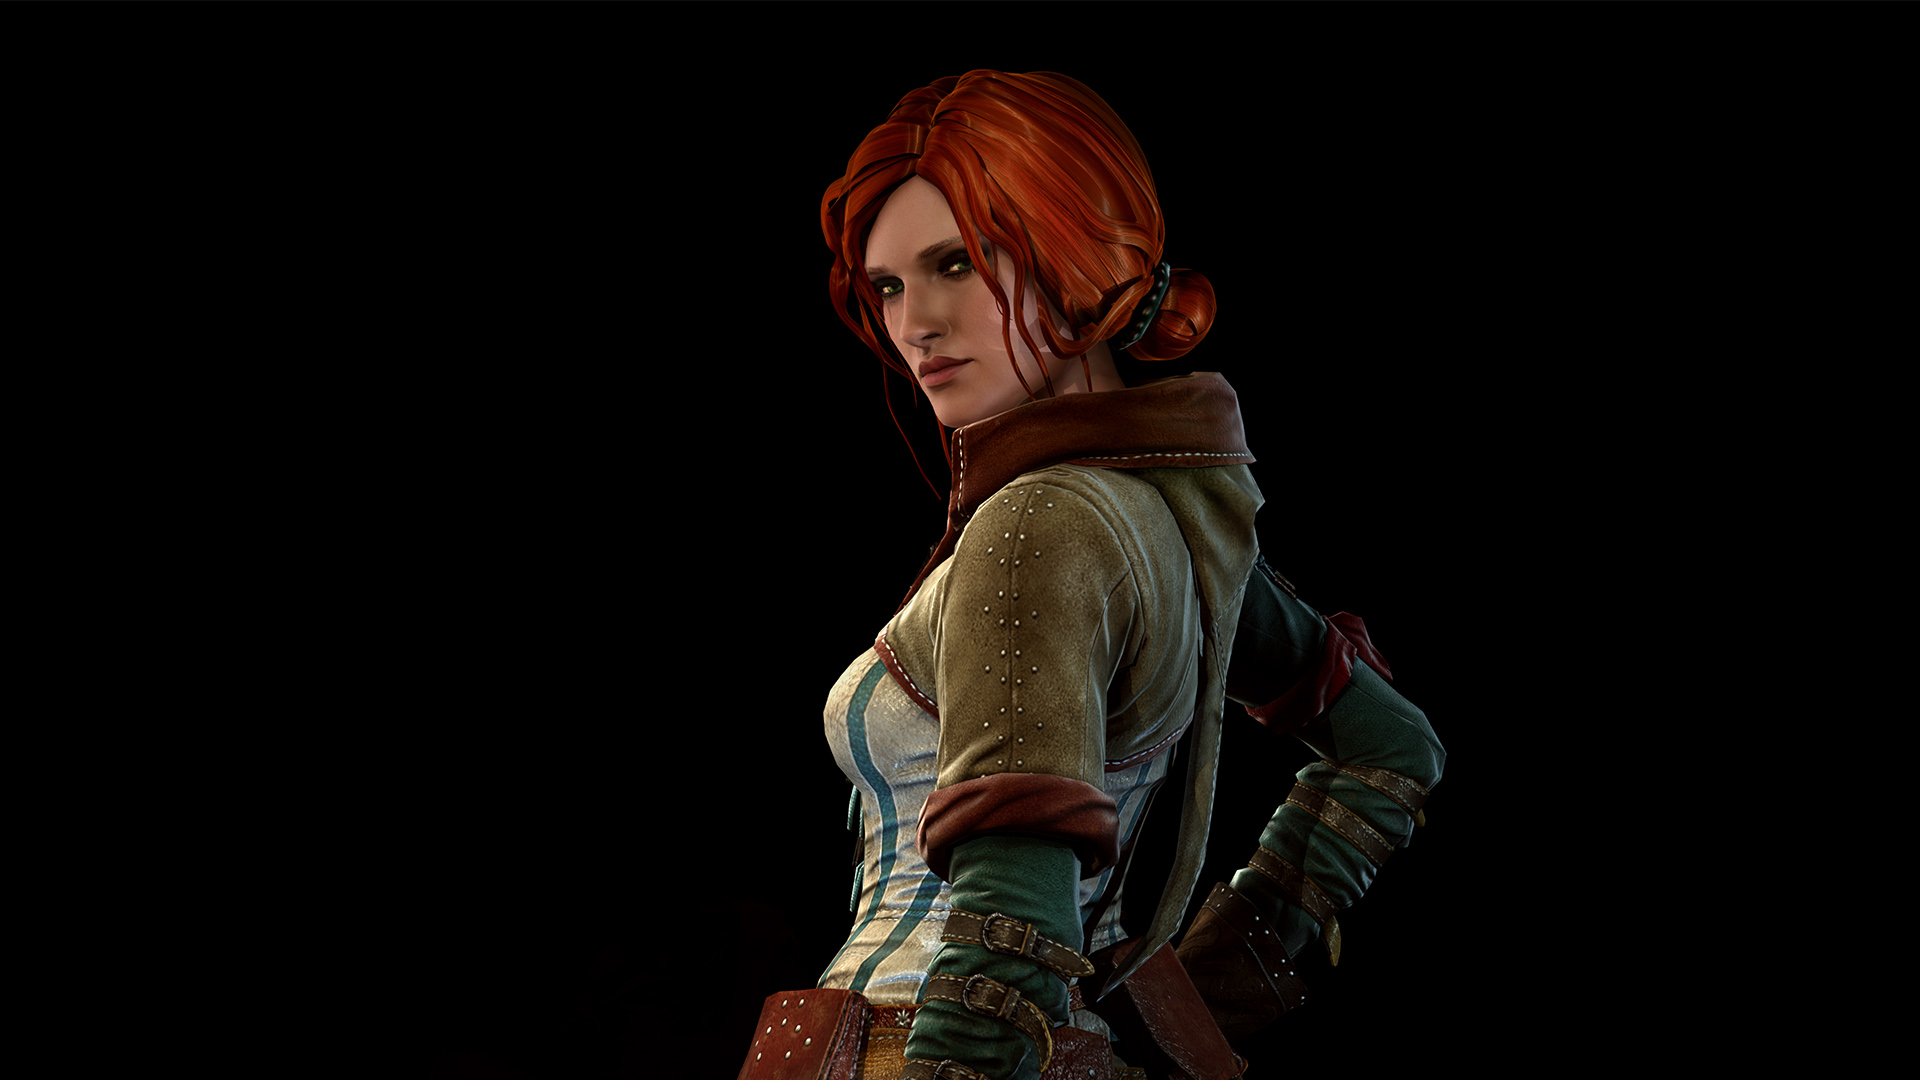 Alfa Img Showing Triss The Witcher Wallpaper HD